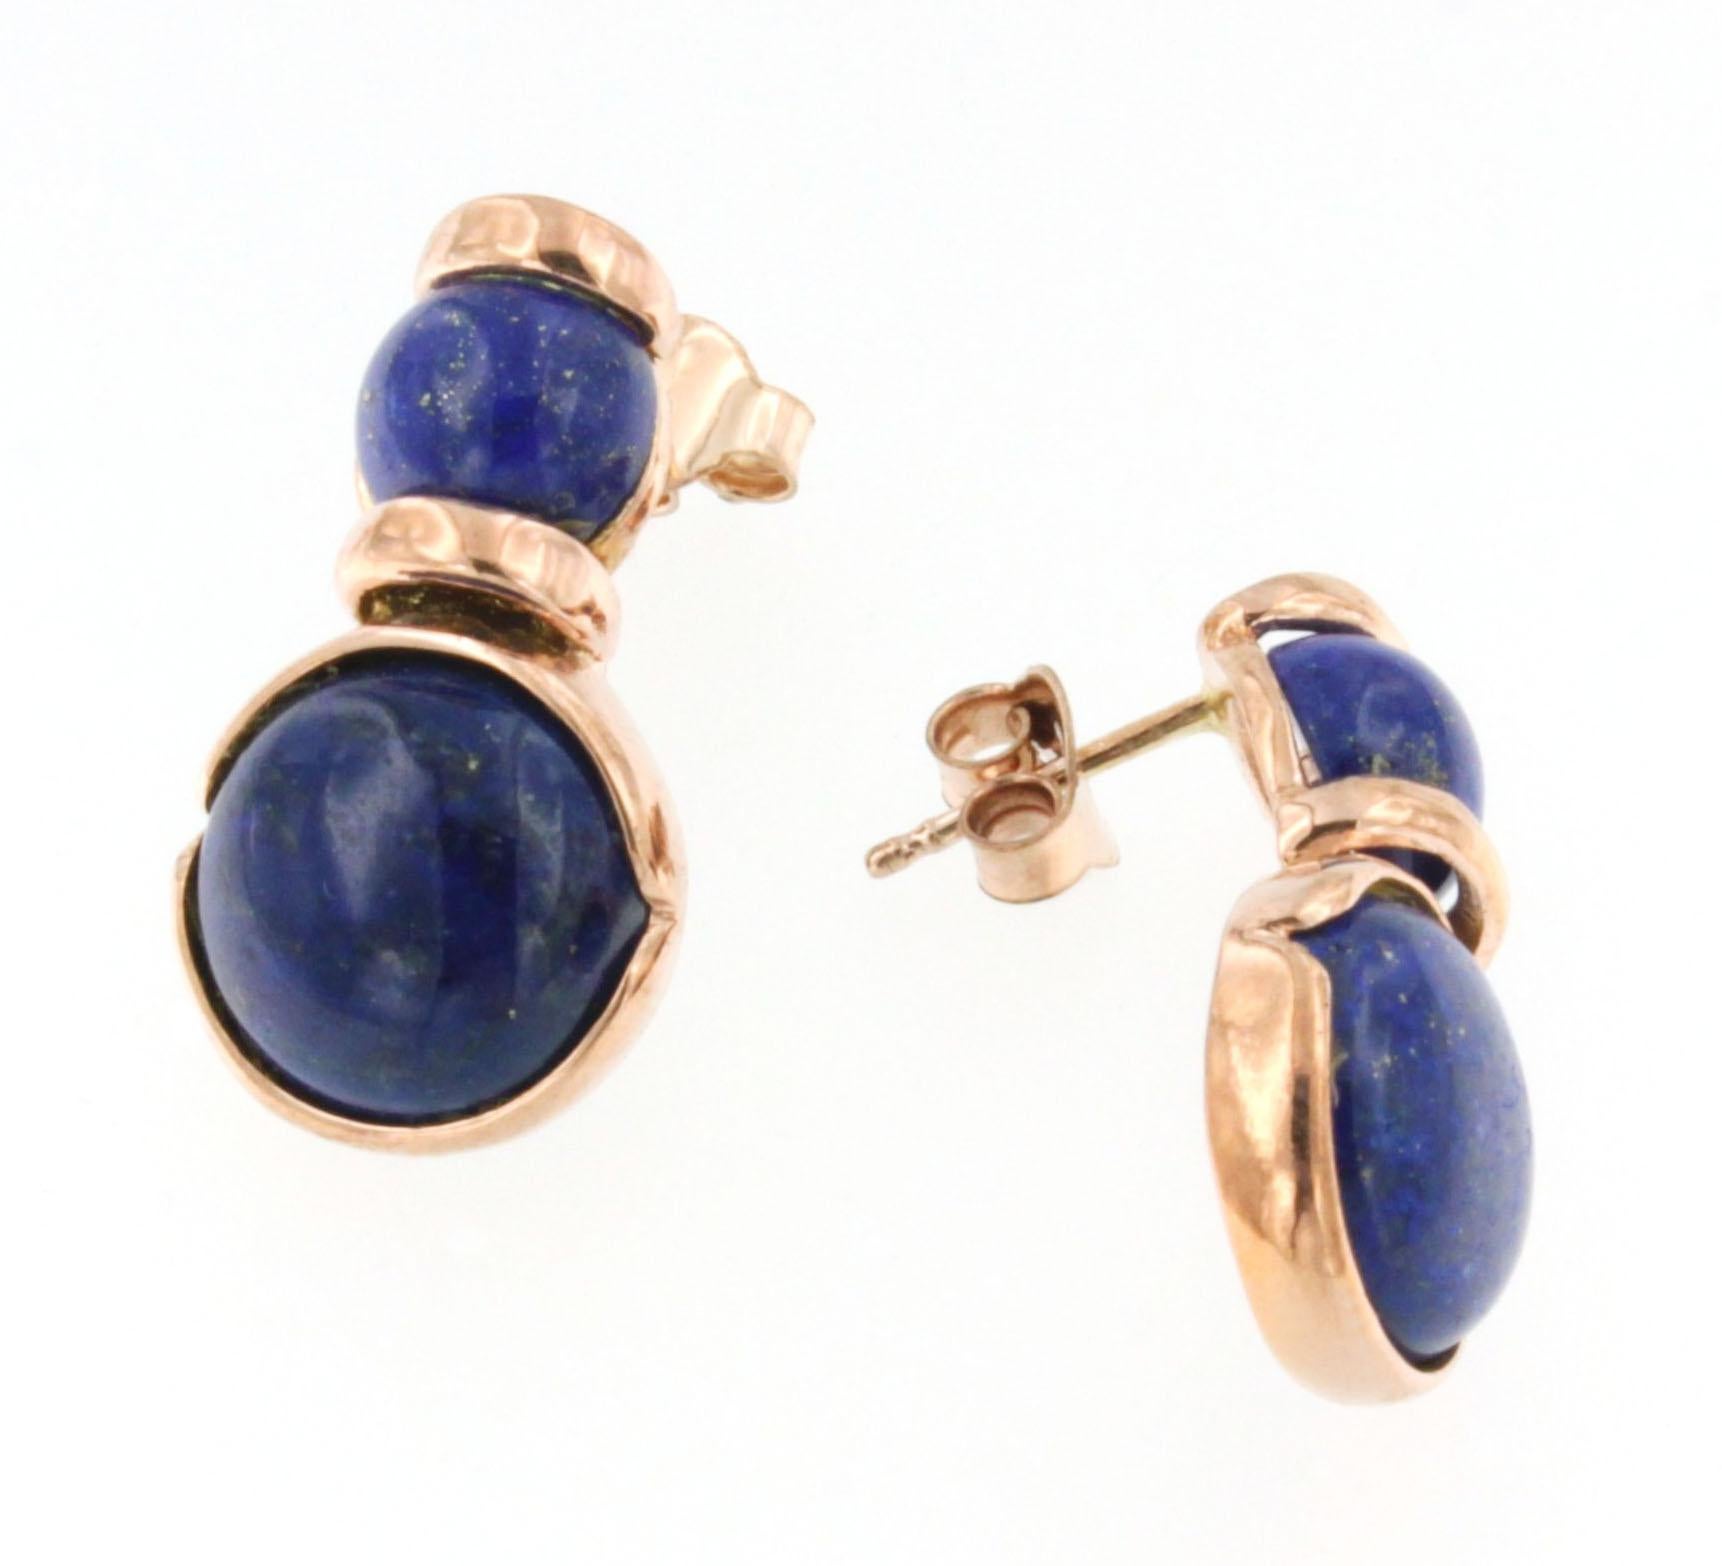 Fashion modern Earrings in 9 kt rose gold with blue natural Lapislazzuli 